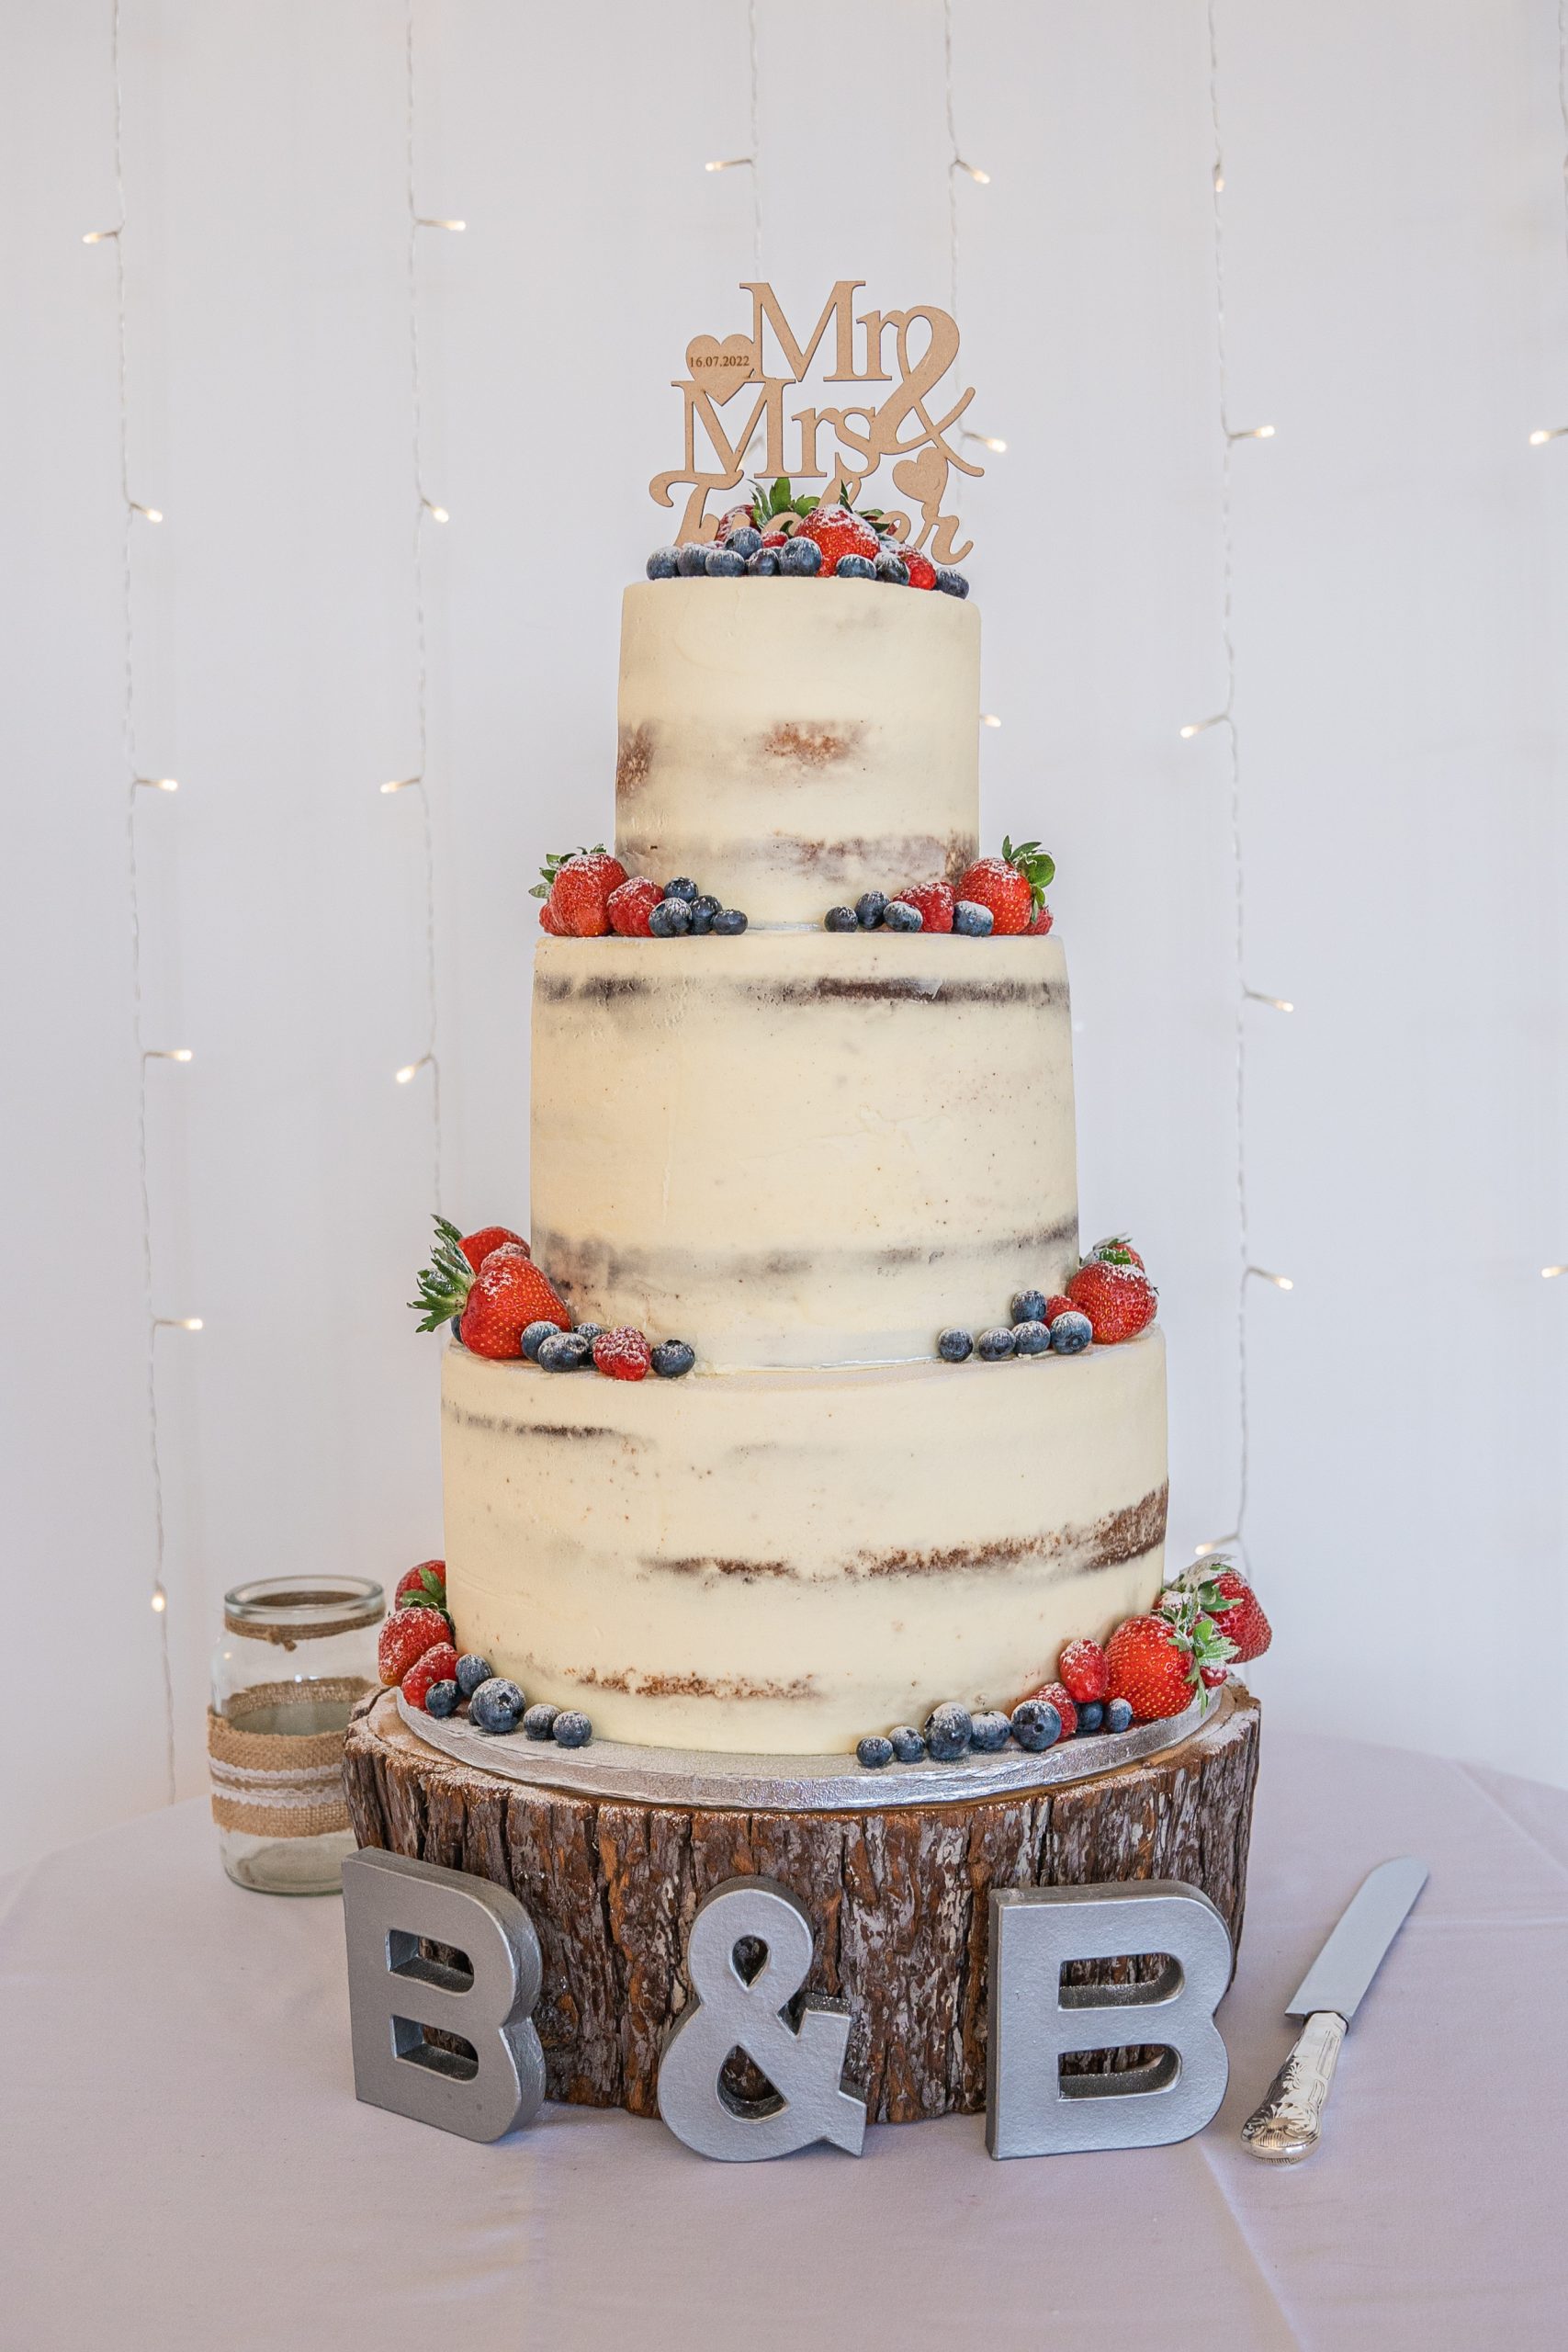 Delicious looking three tier semi naked wedding cake on a log slice ready to cut